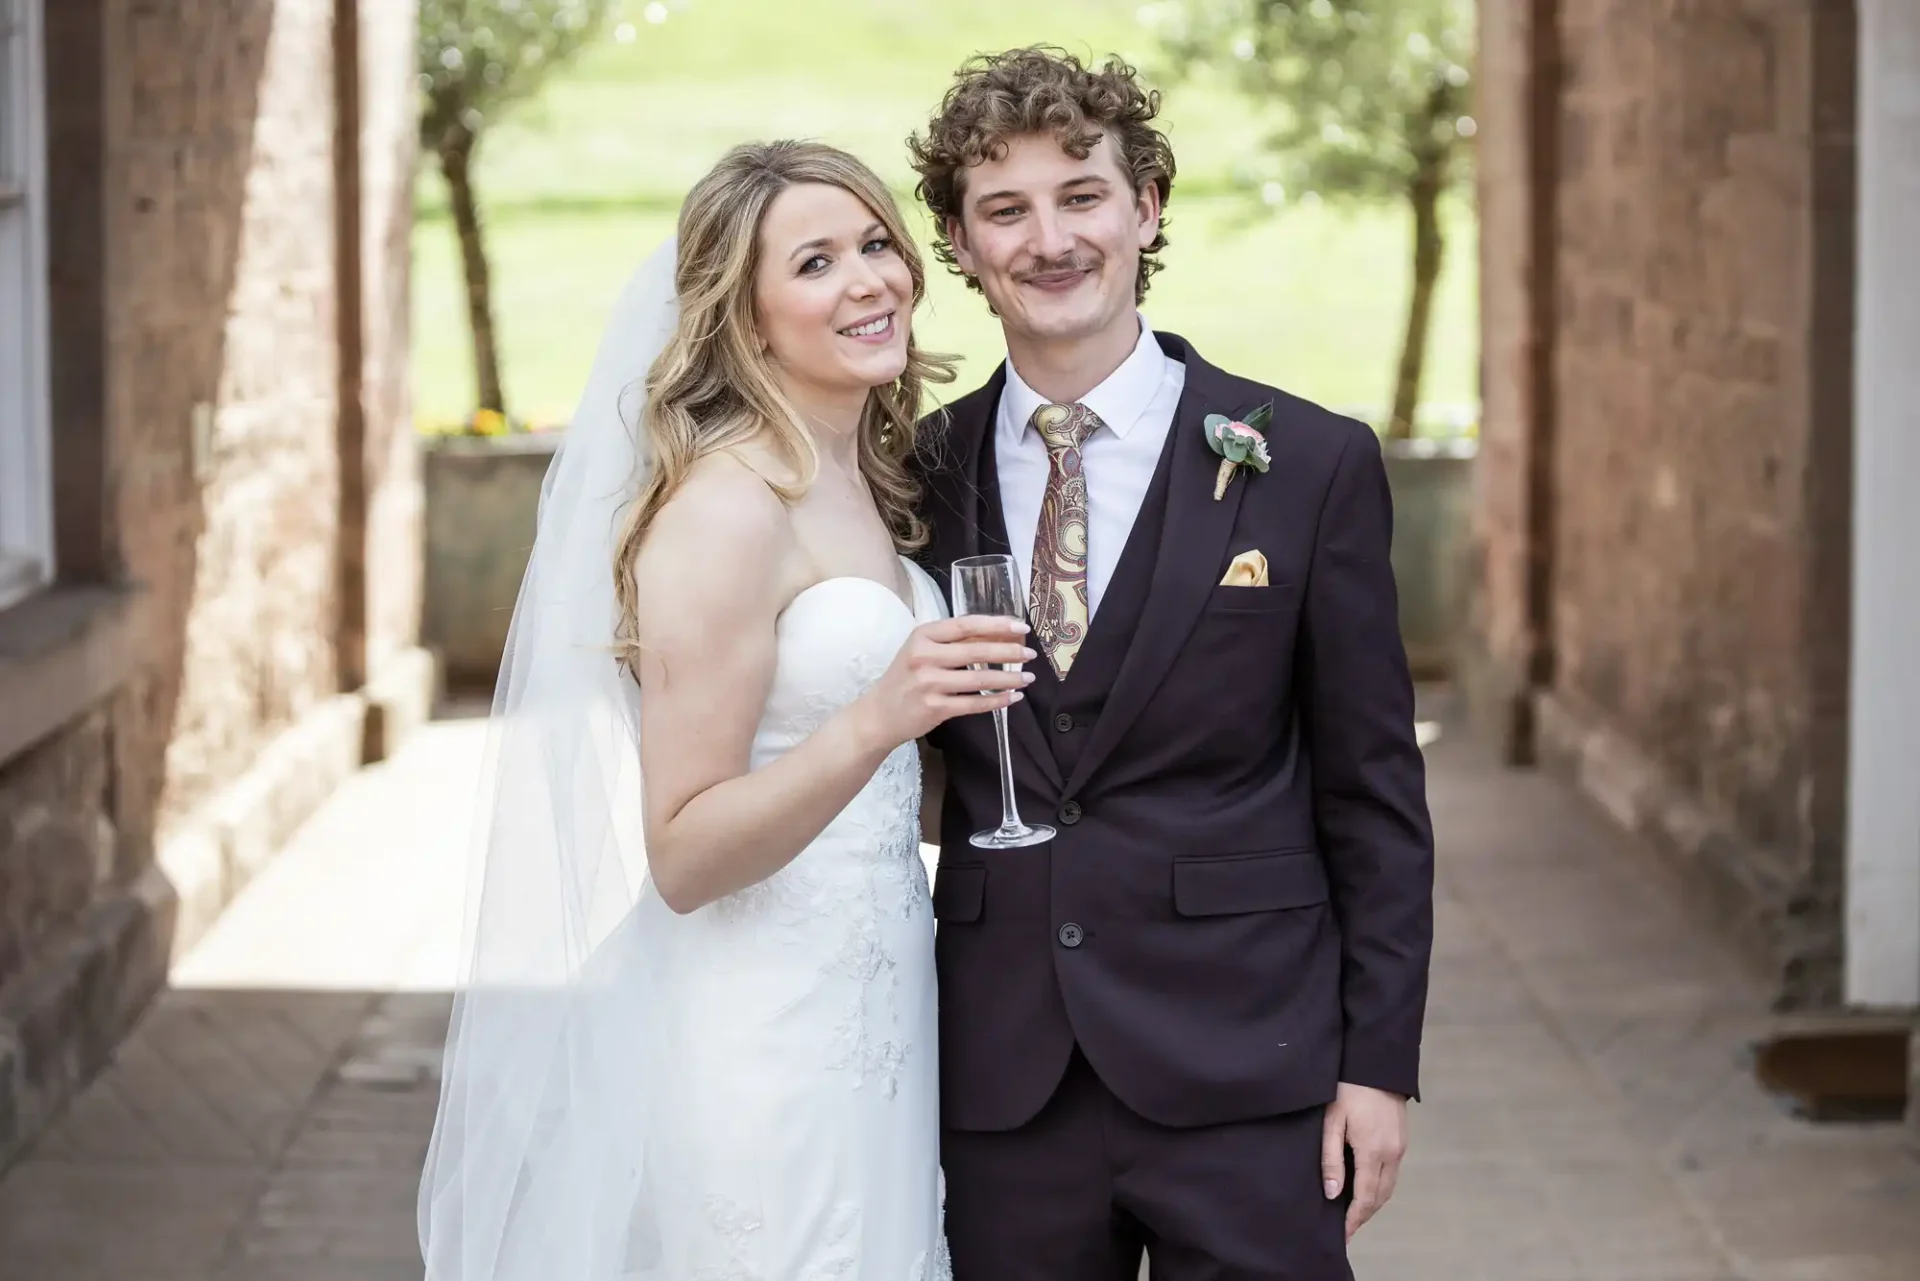 A bride and groom smiling and holding champagne flutes at a wedding venue.